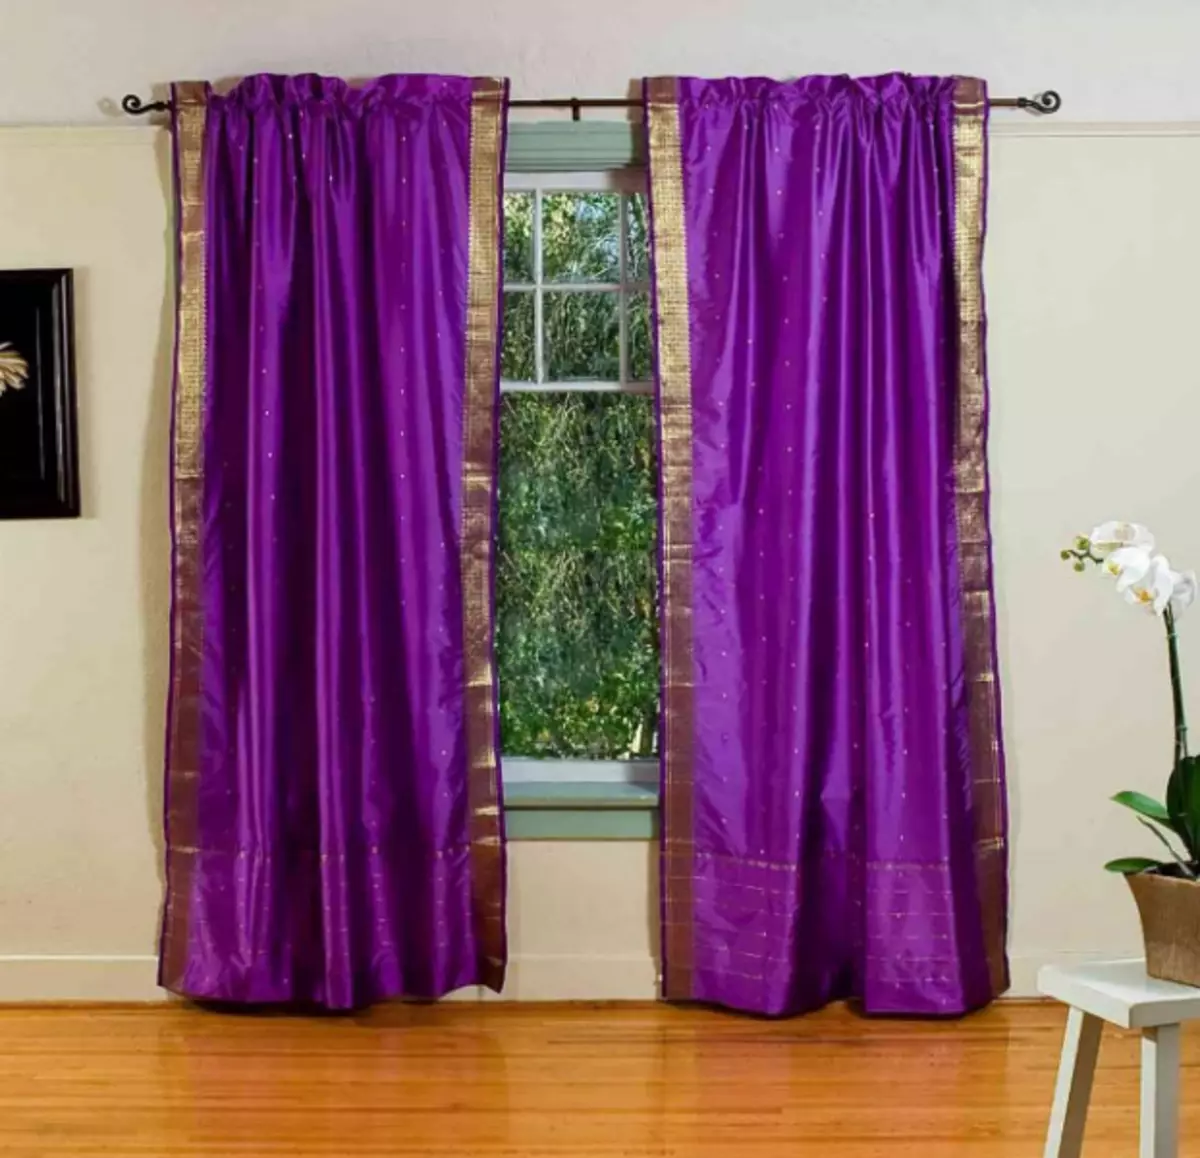 Is it suitable in your interior of the curtain lilac color?